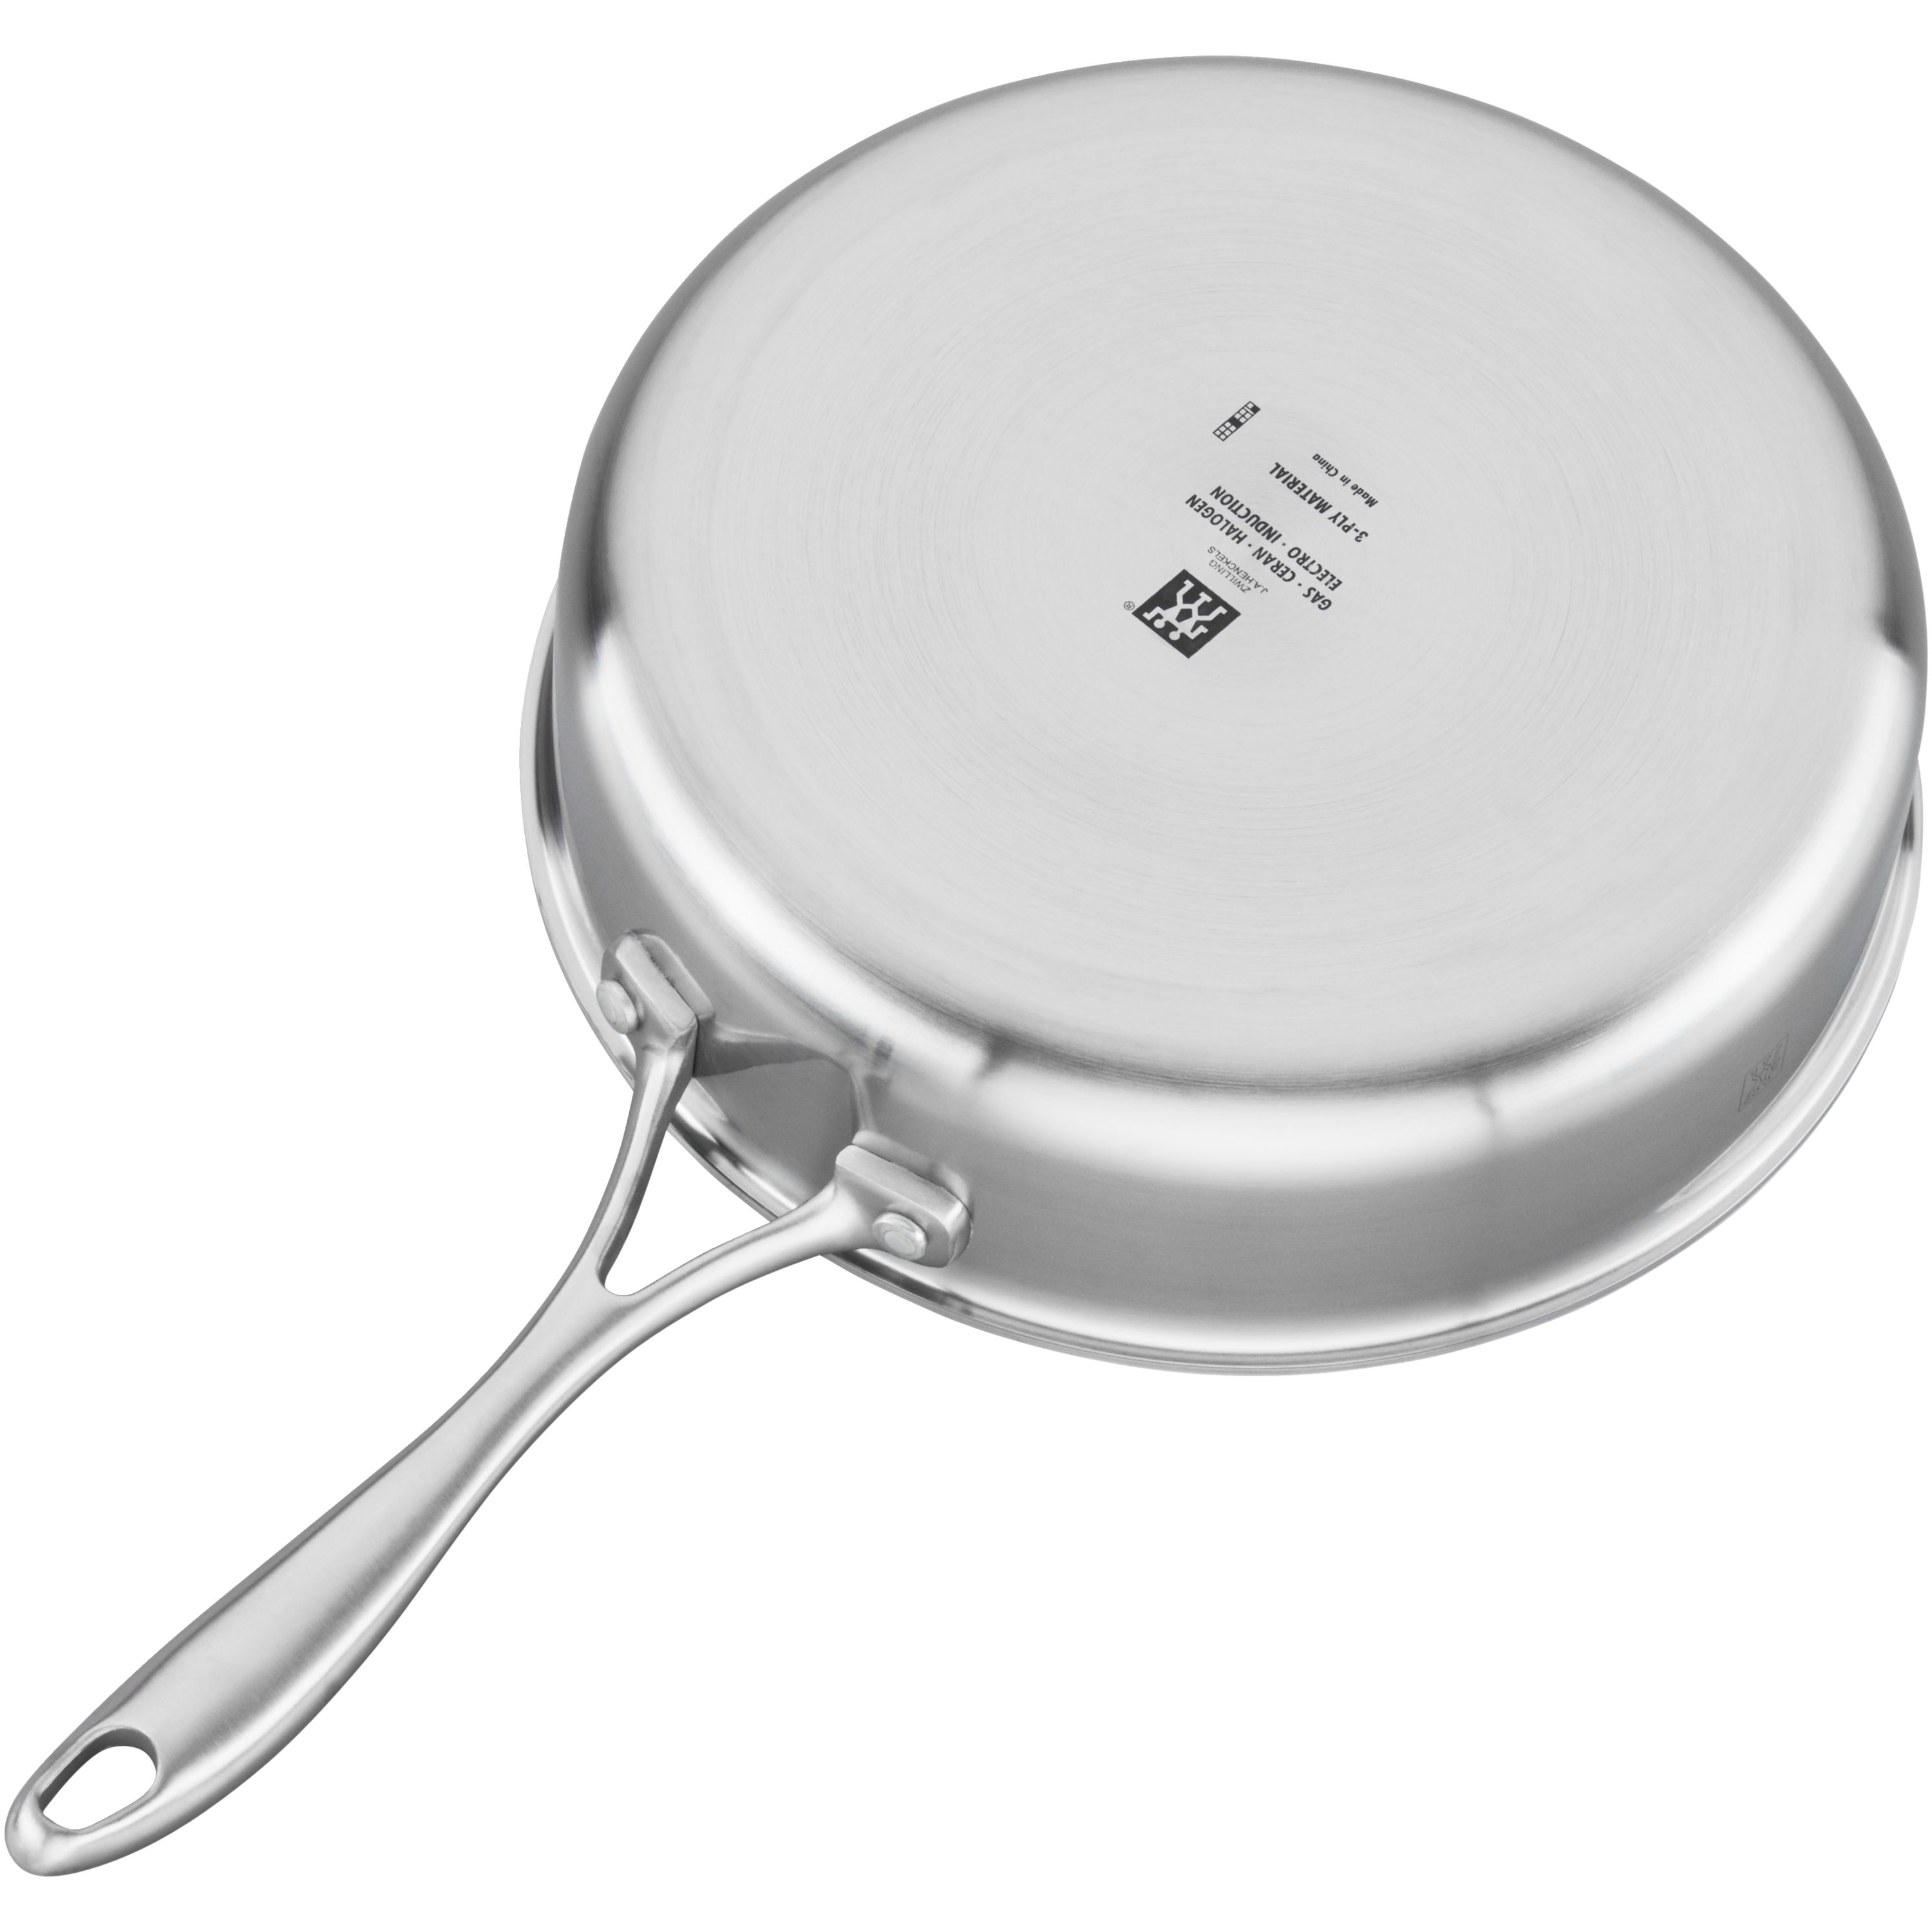 https://www.zwilling.com/on/demandware.static/-/Sites-zwilling-master-catalog/default/dw8122a7bf/images/large/64097-240_2.jpg